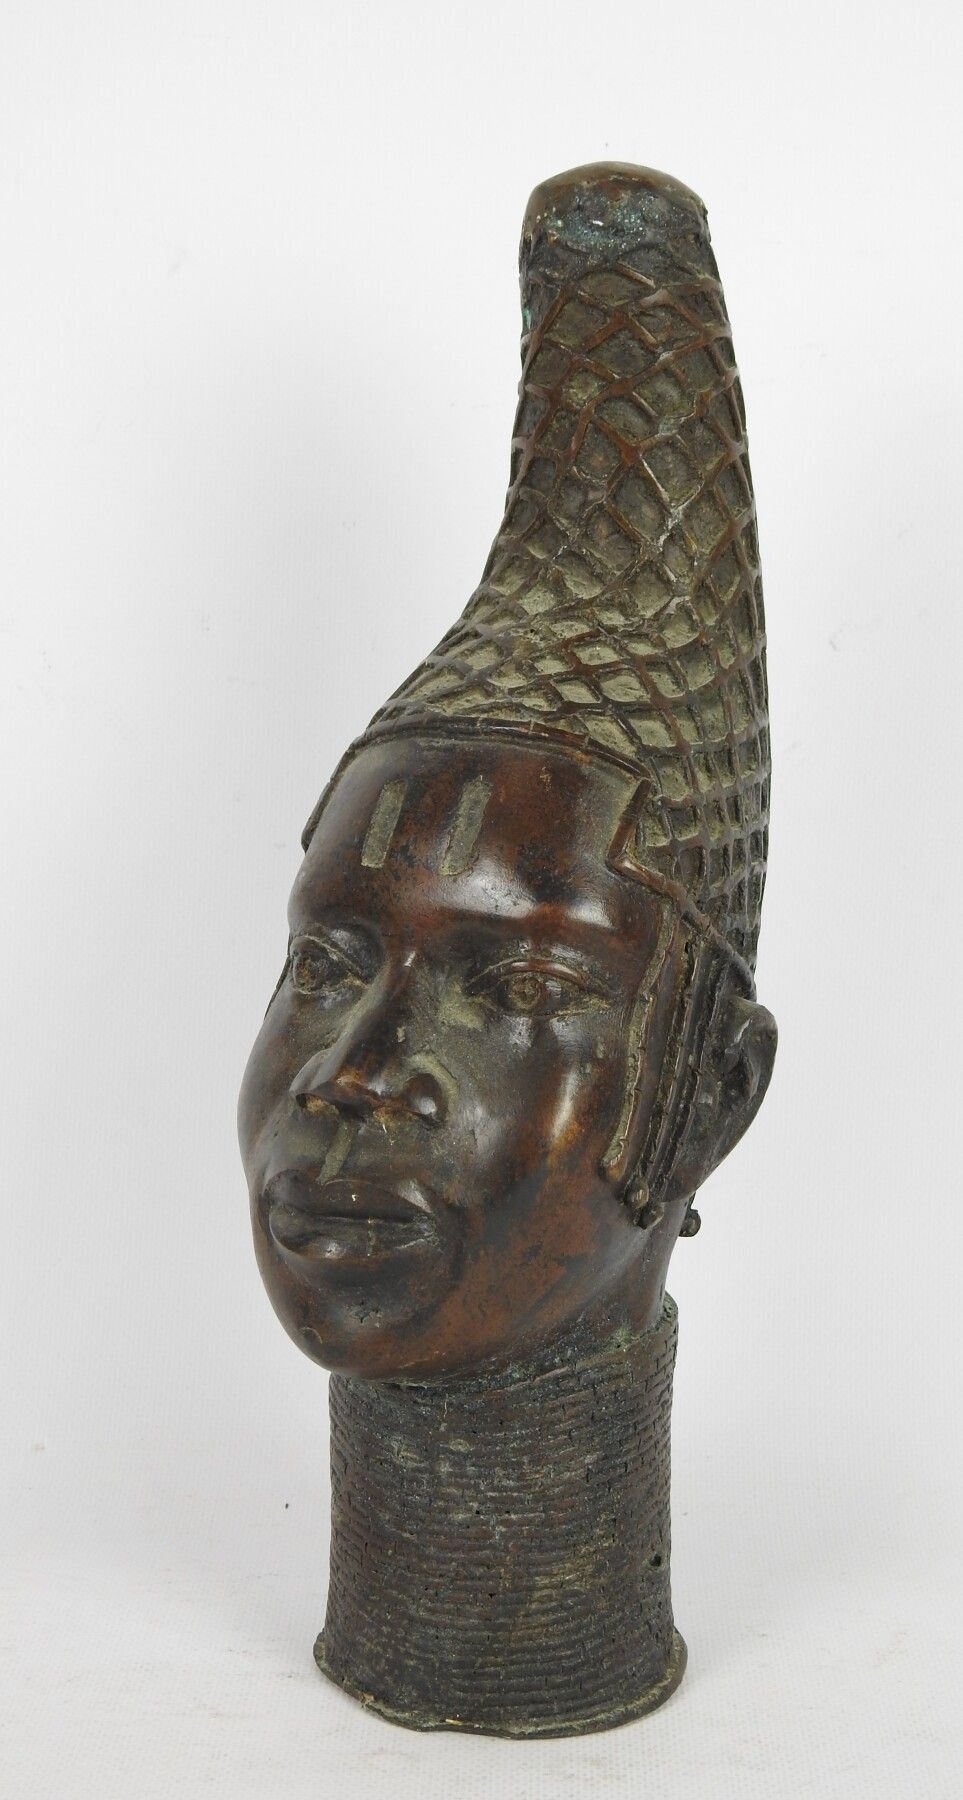 Null KINGDOM OF BENIN, Nigeria : Queen's head very worked in copper alloy with l&hellip;